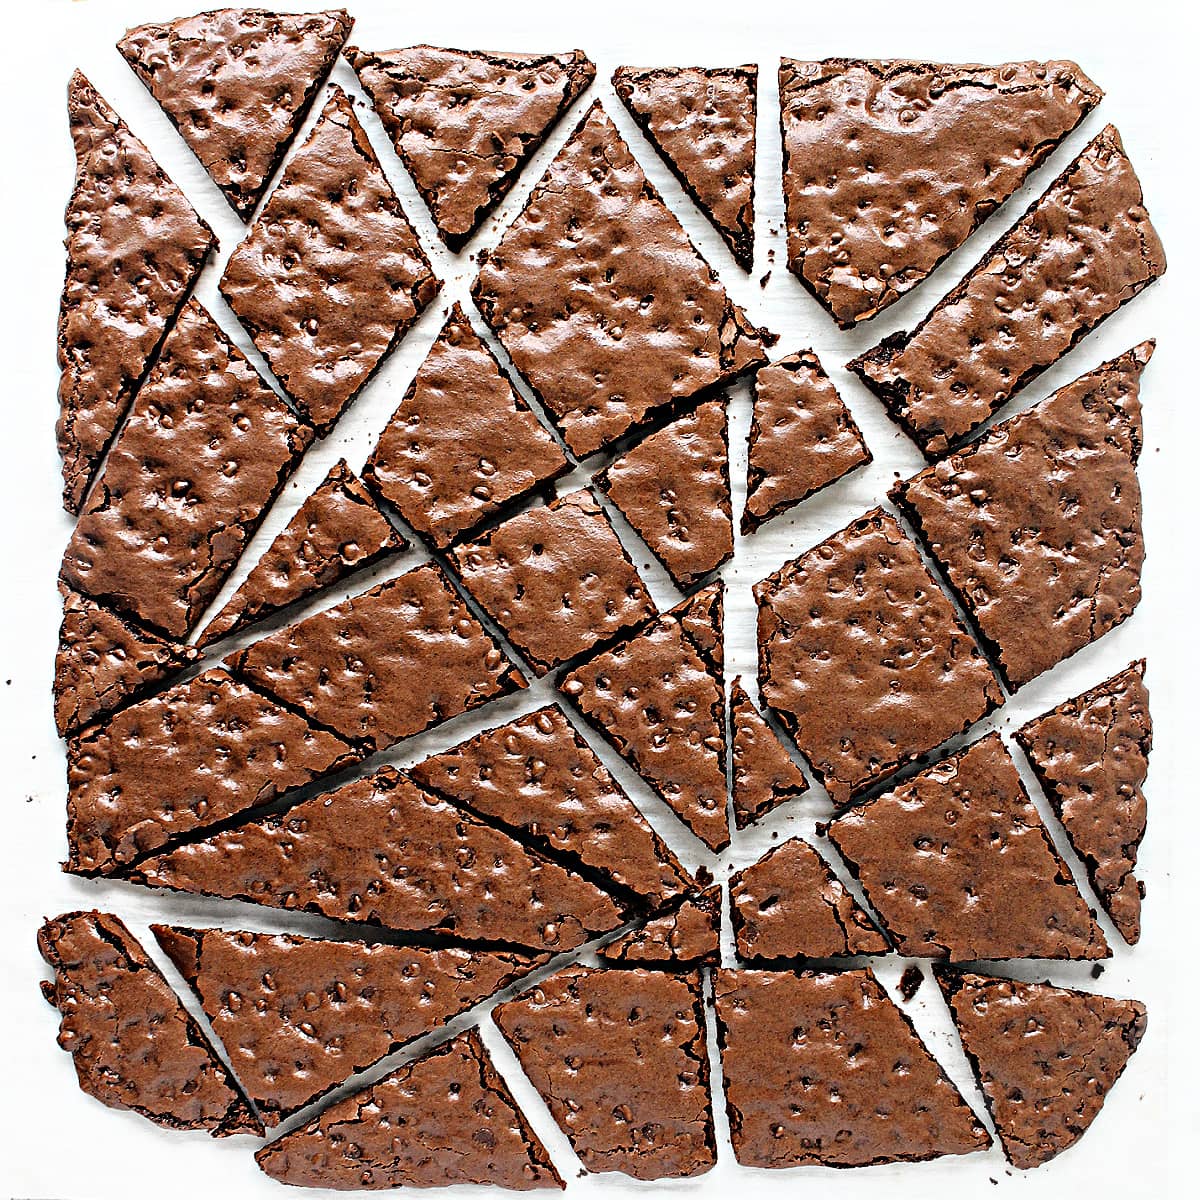 Brownie brittle randomly cut into wedges of different sizes.